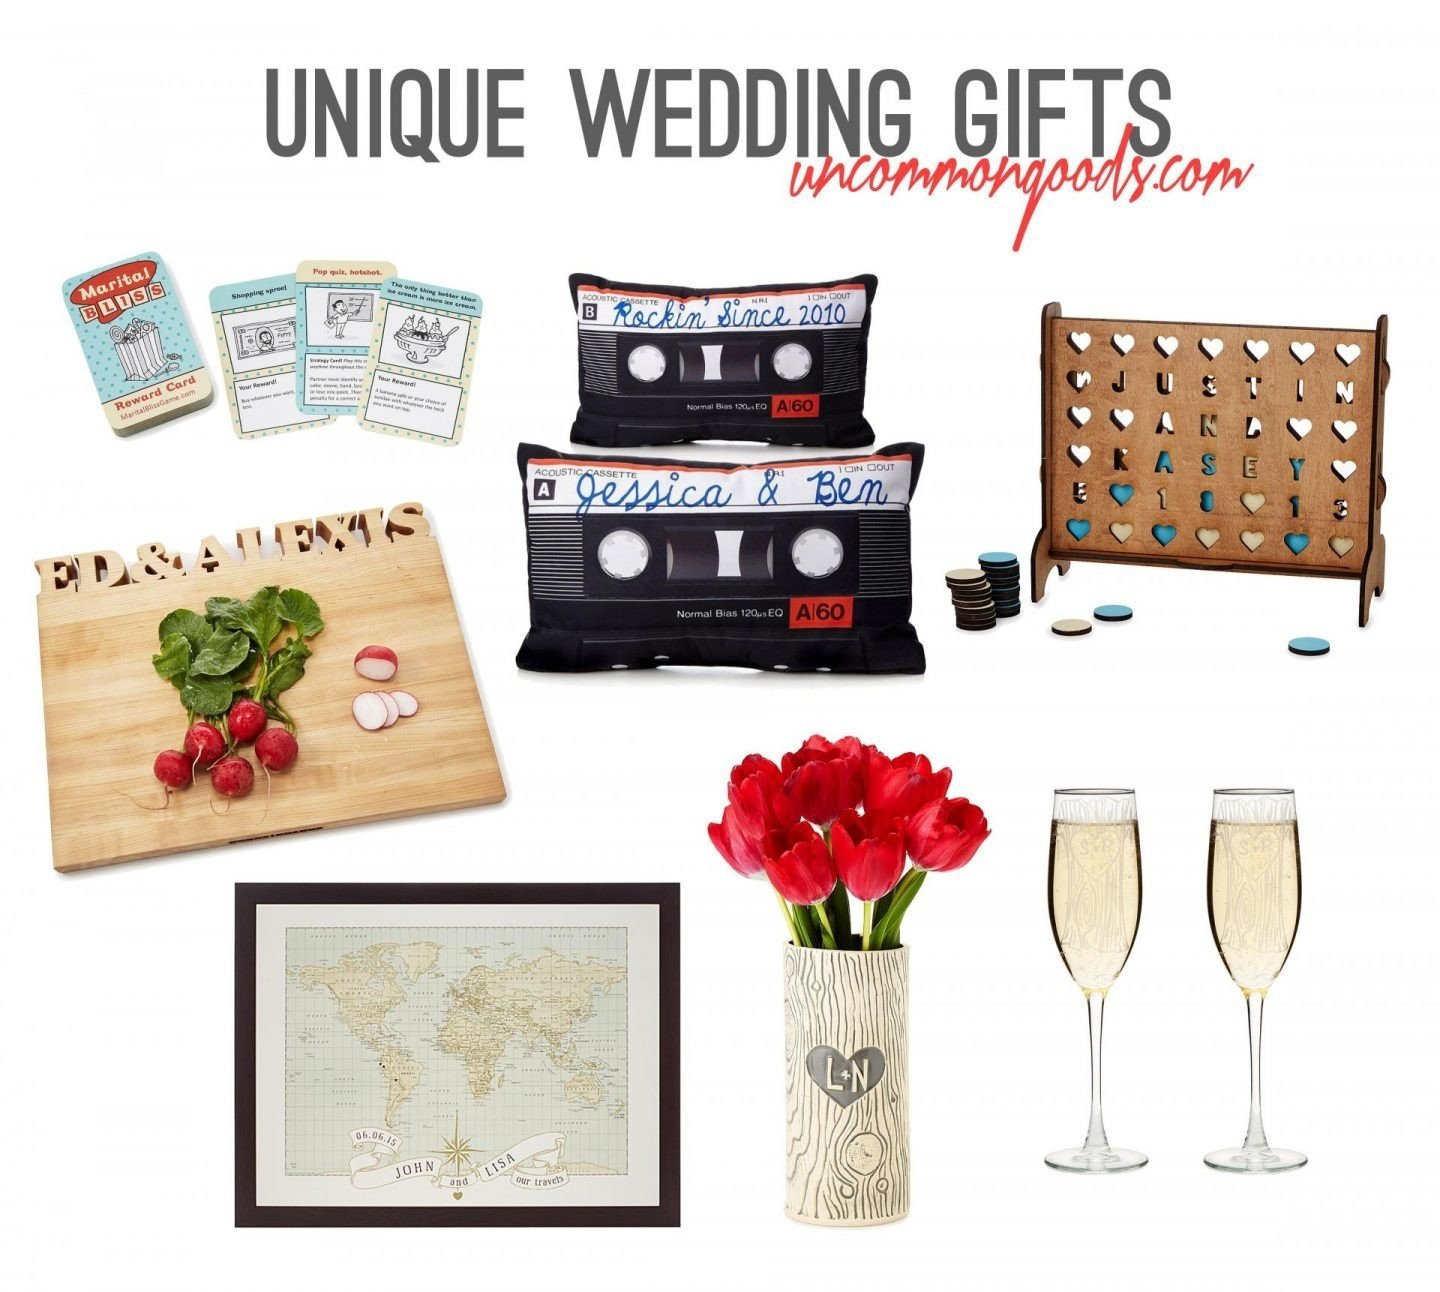 Wedding Gift Ideas For Older Couple Second Marriage
 10 Fashionable Wedding Gift Ideas For Second Marriages 2019